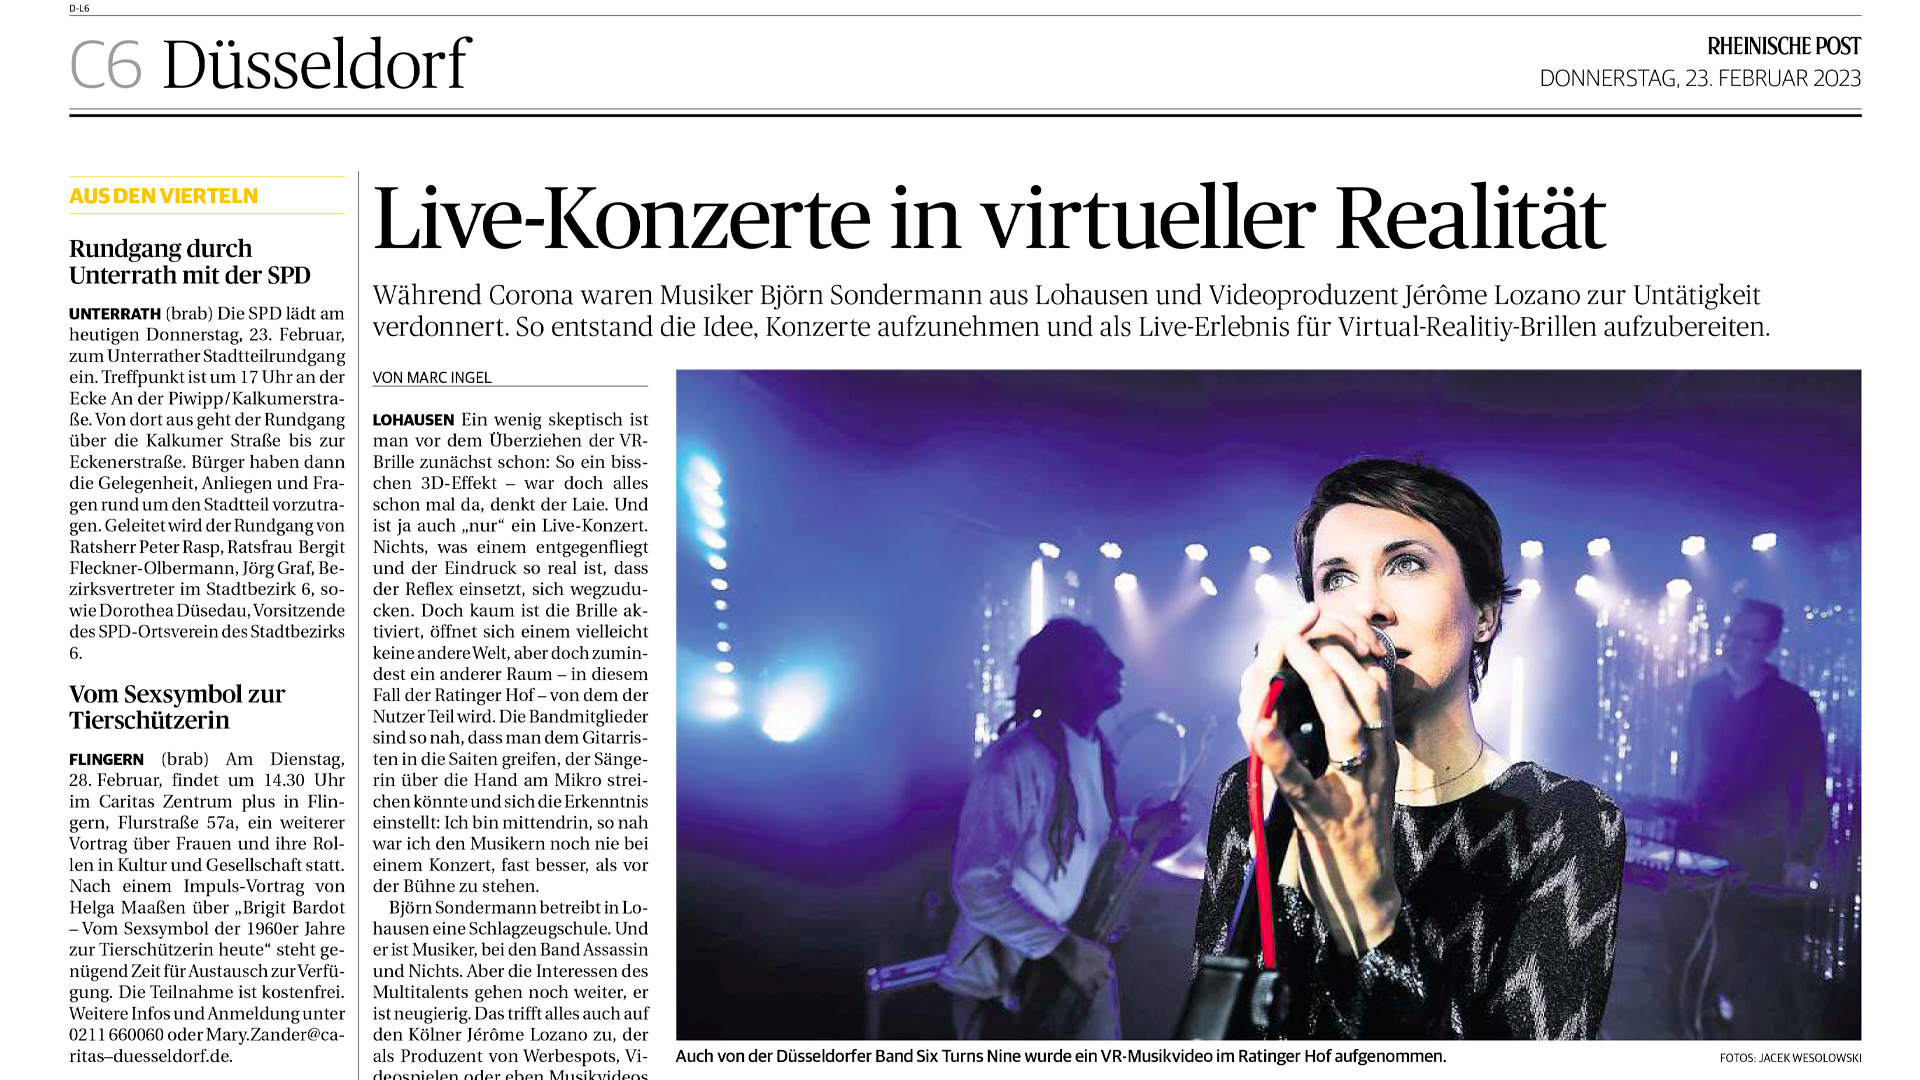 RHEINISCHE POST: A full-page feature on our ON STAGE projects!